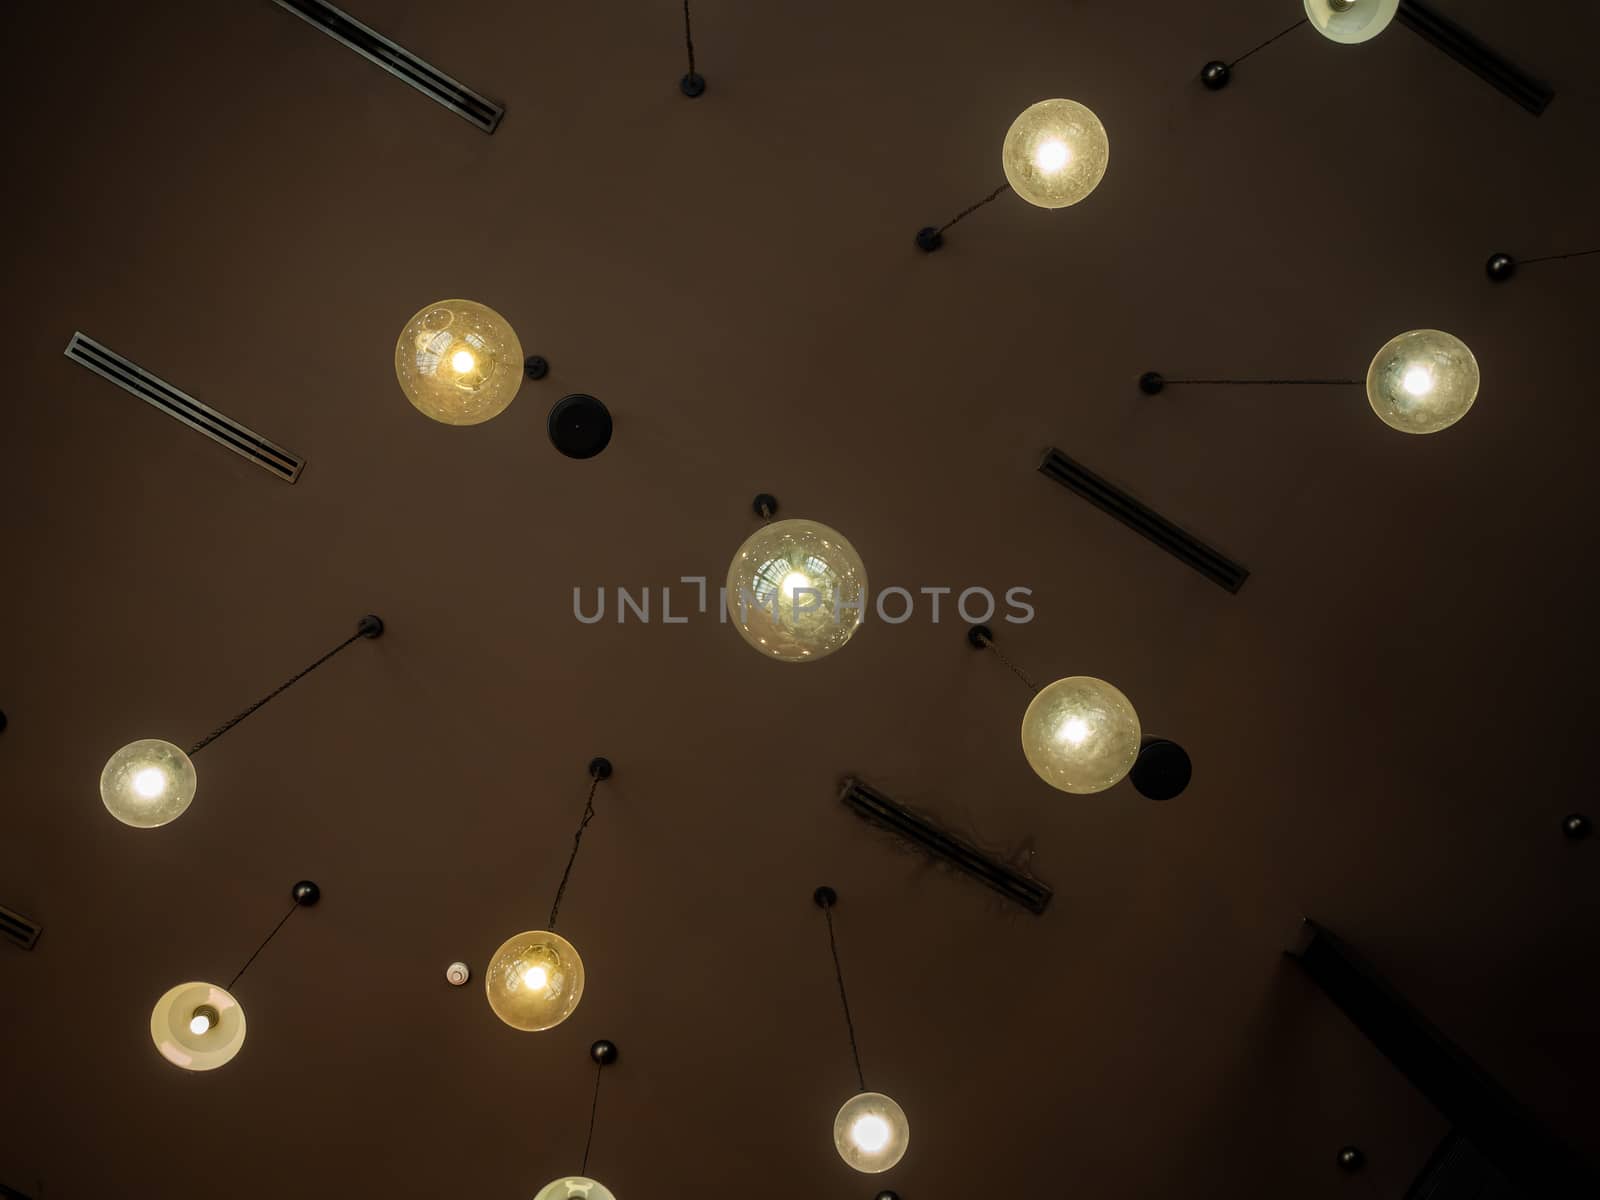 Ceiling light bulbs retro style hanging from ceiling in dark roo by tete_escape